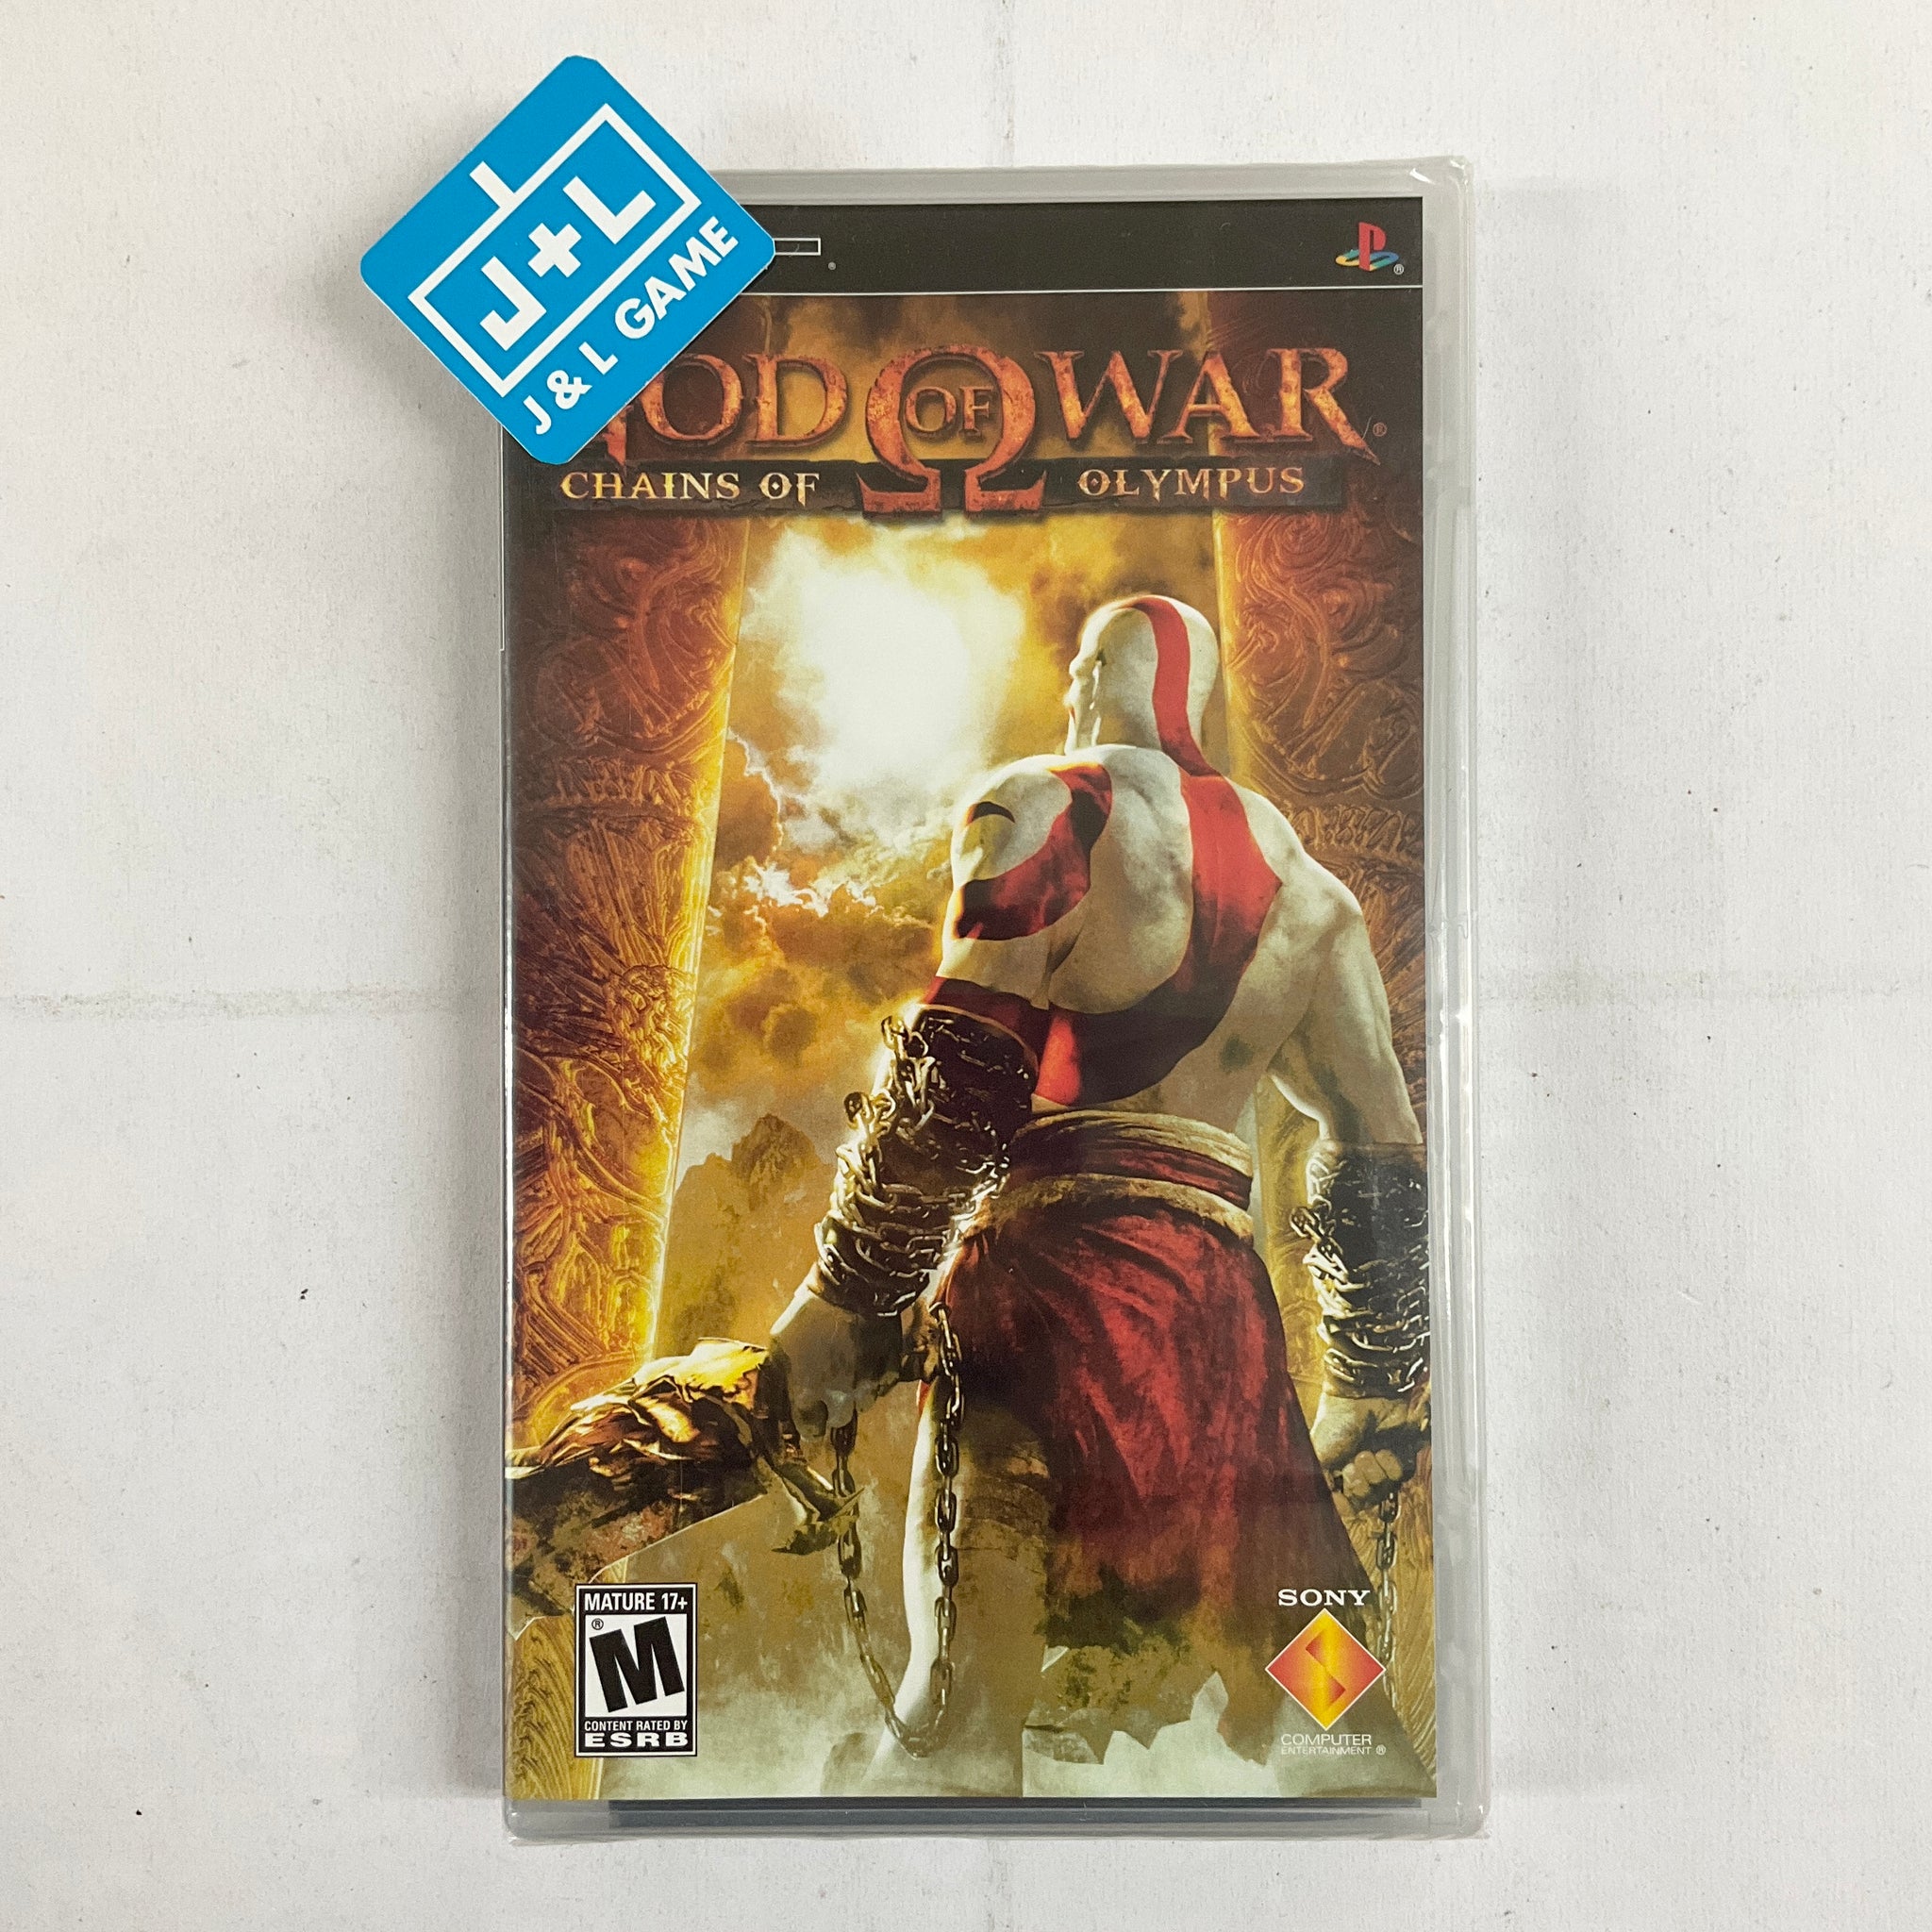 God of War Chains of Olympus - Sony PSP 